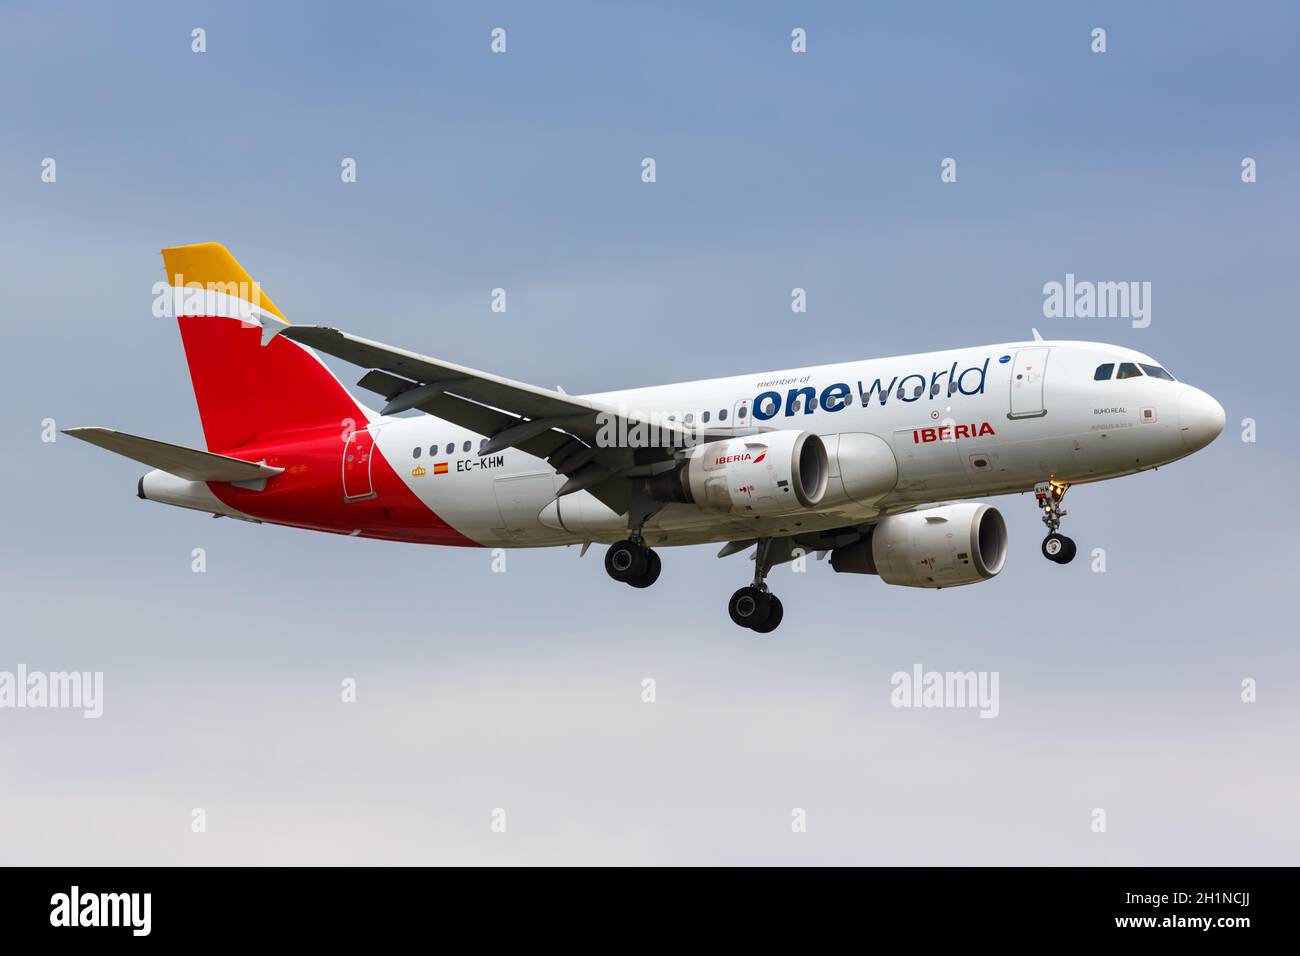 London, United Kingdom - July 9, 2019: Iberia Airbus A319 airplane in the OneWorld special livery at London Heathrow Airport (LHR) in the United Kingd Stock Photo